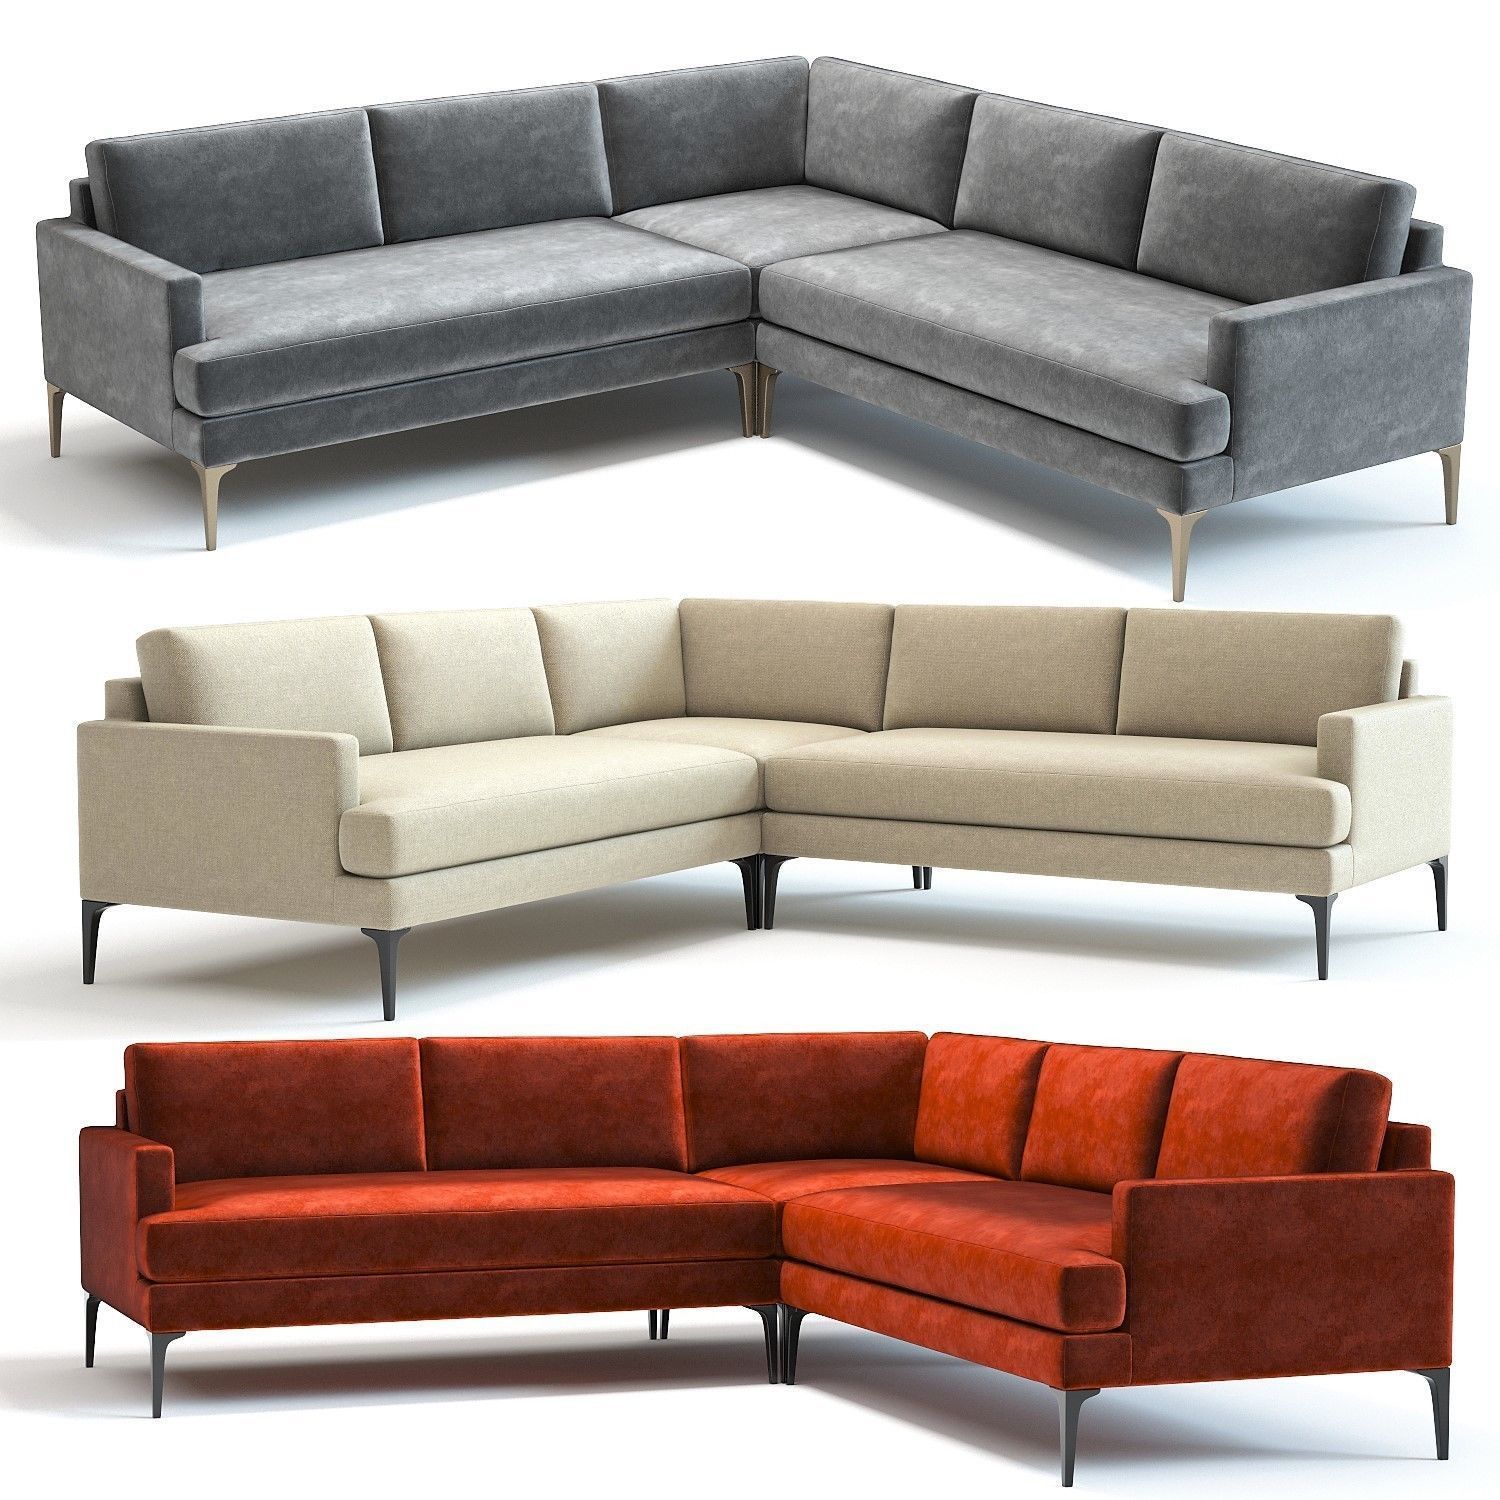 3d West Elm Andes L Shaped Sofa | Cgtrader Throughout Owego L Shaped Sectional Sofas (View 15 of 15)